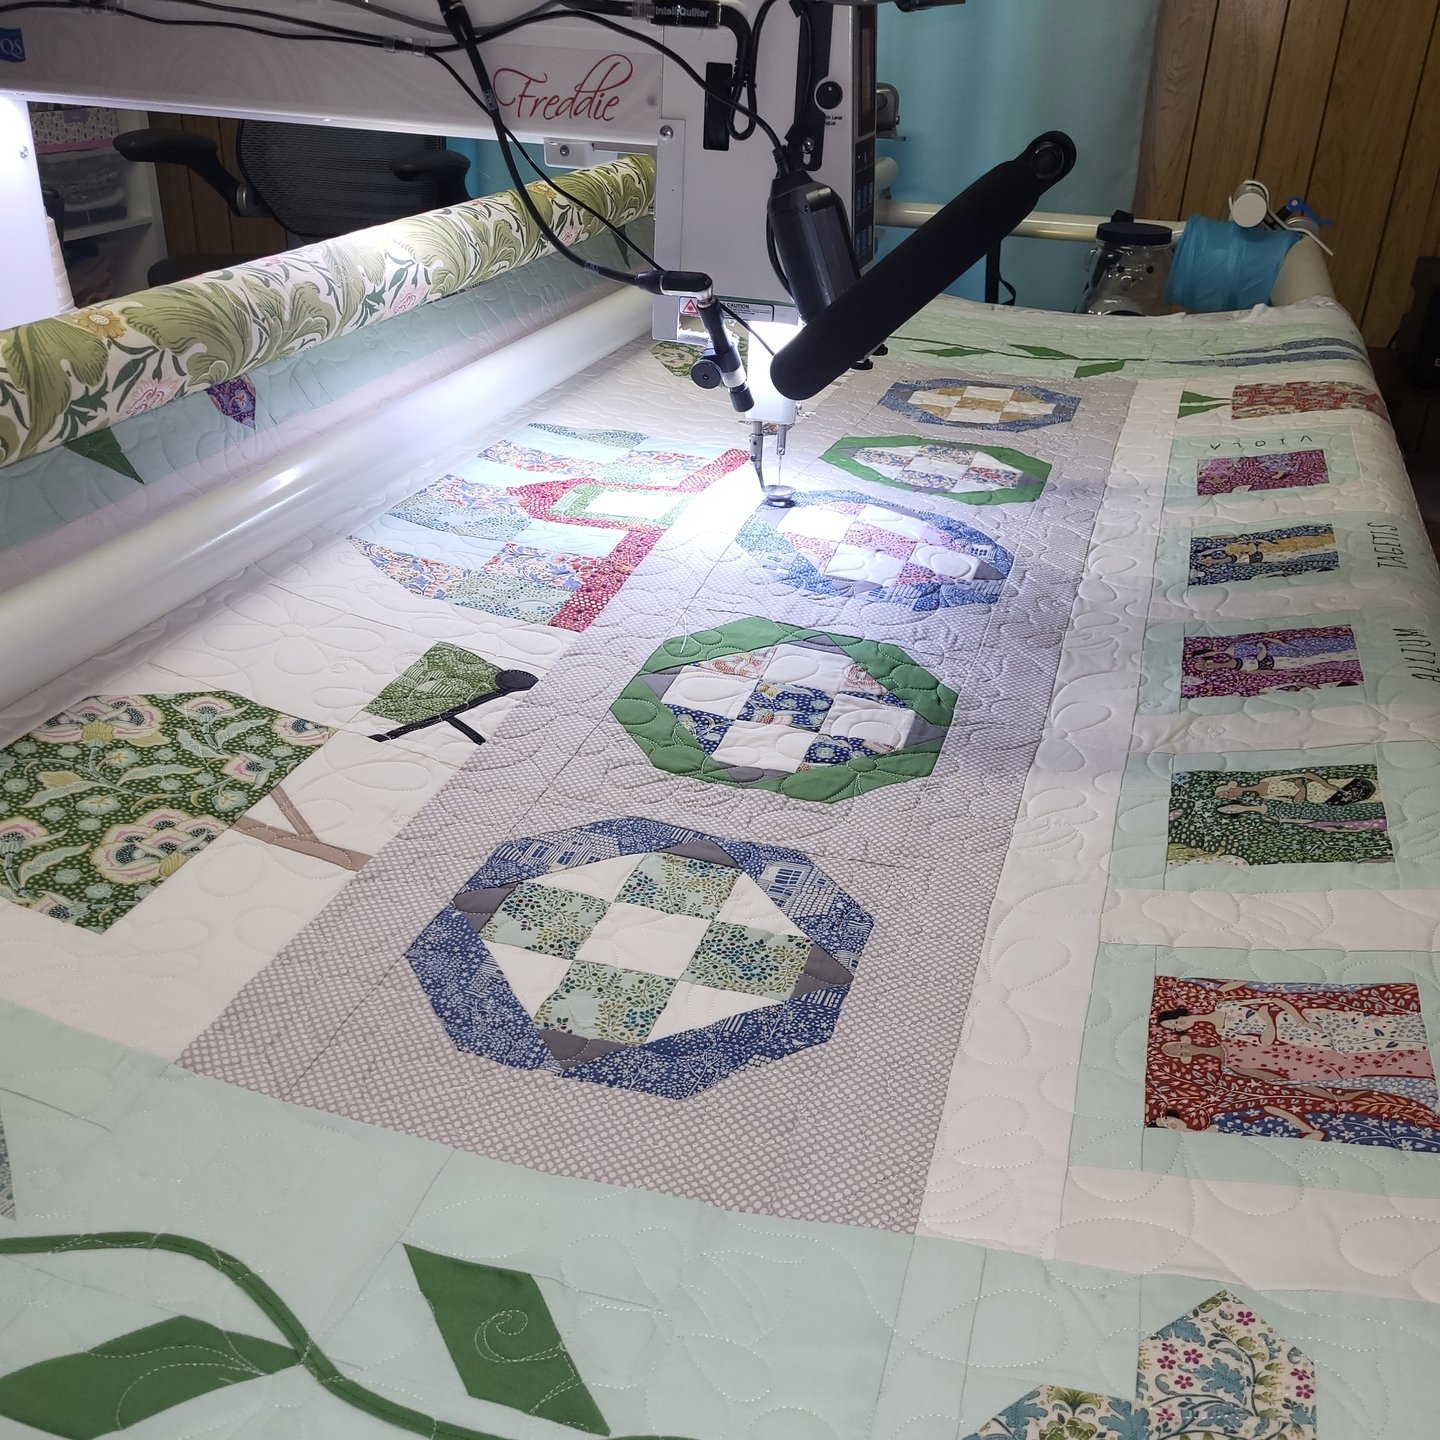 It's Freddie Friday!! 🎉🎉

I always love quilts with Tilda fabrics! The fabrics have such delicate designs and the colors are a little more subdued; they're just gorgeous!

Lisa blew me away by filling this quilt with hand-embroidered details, too!
